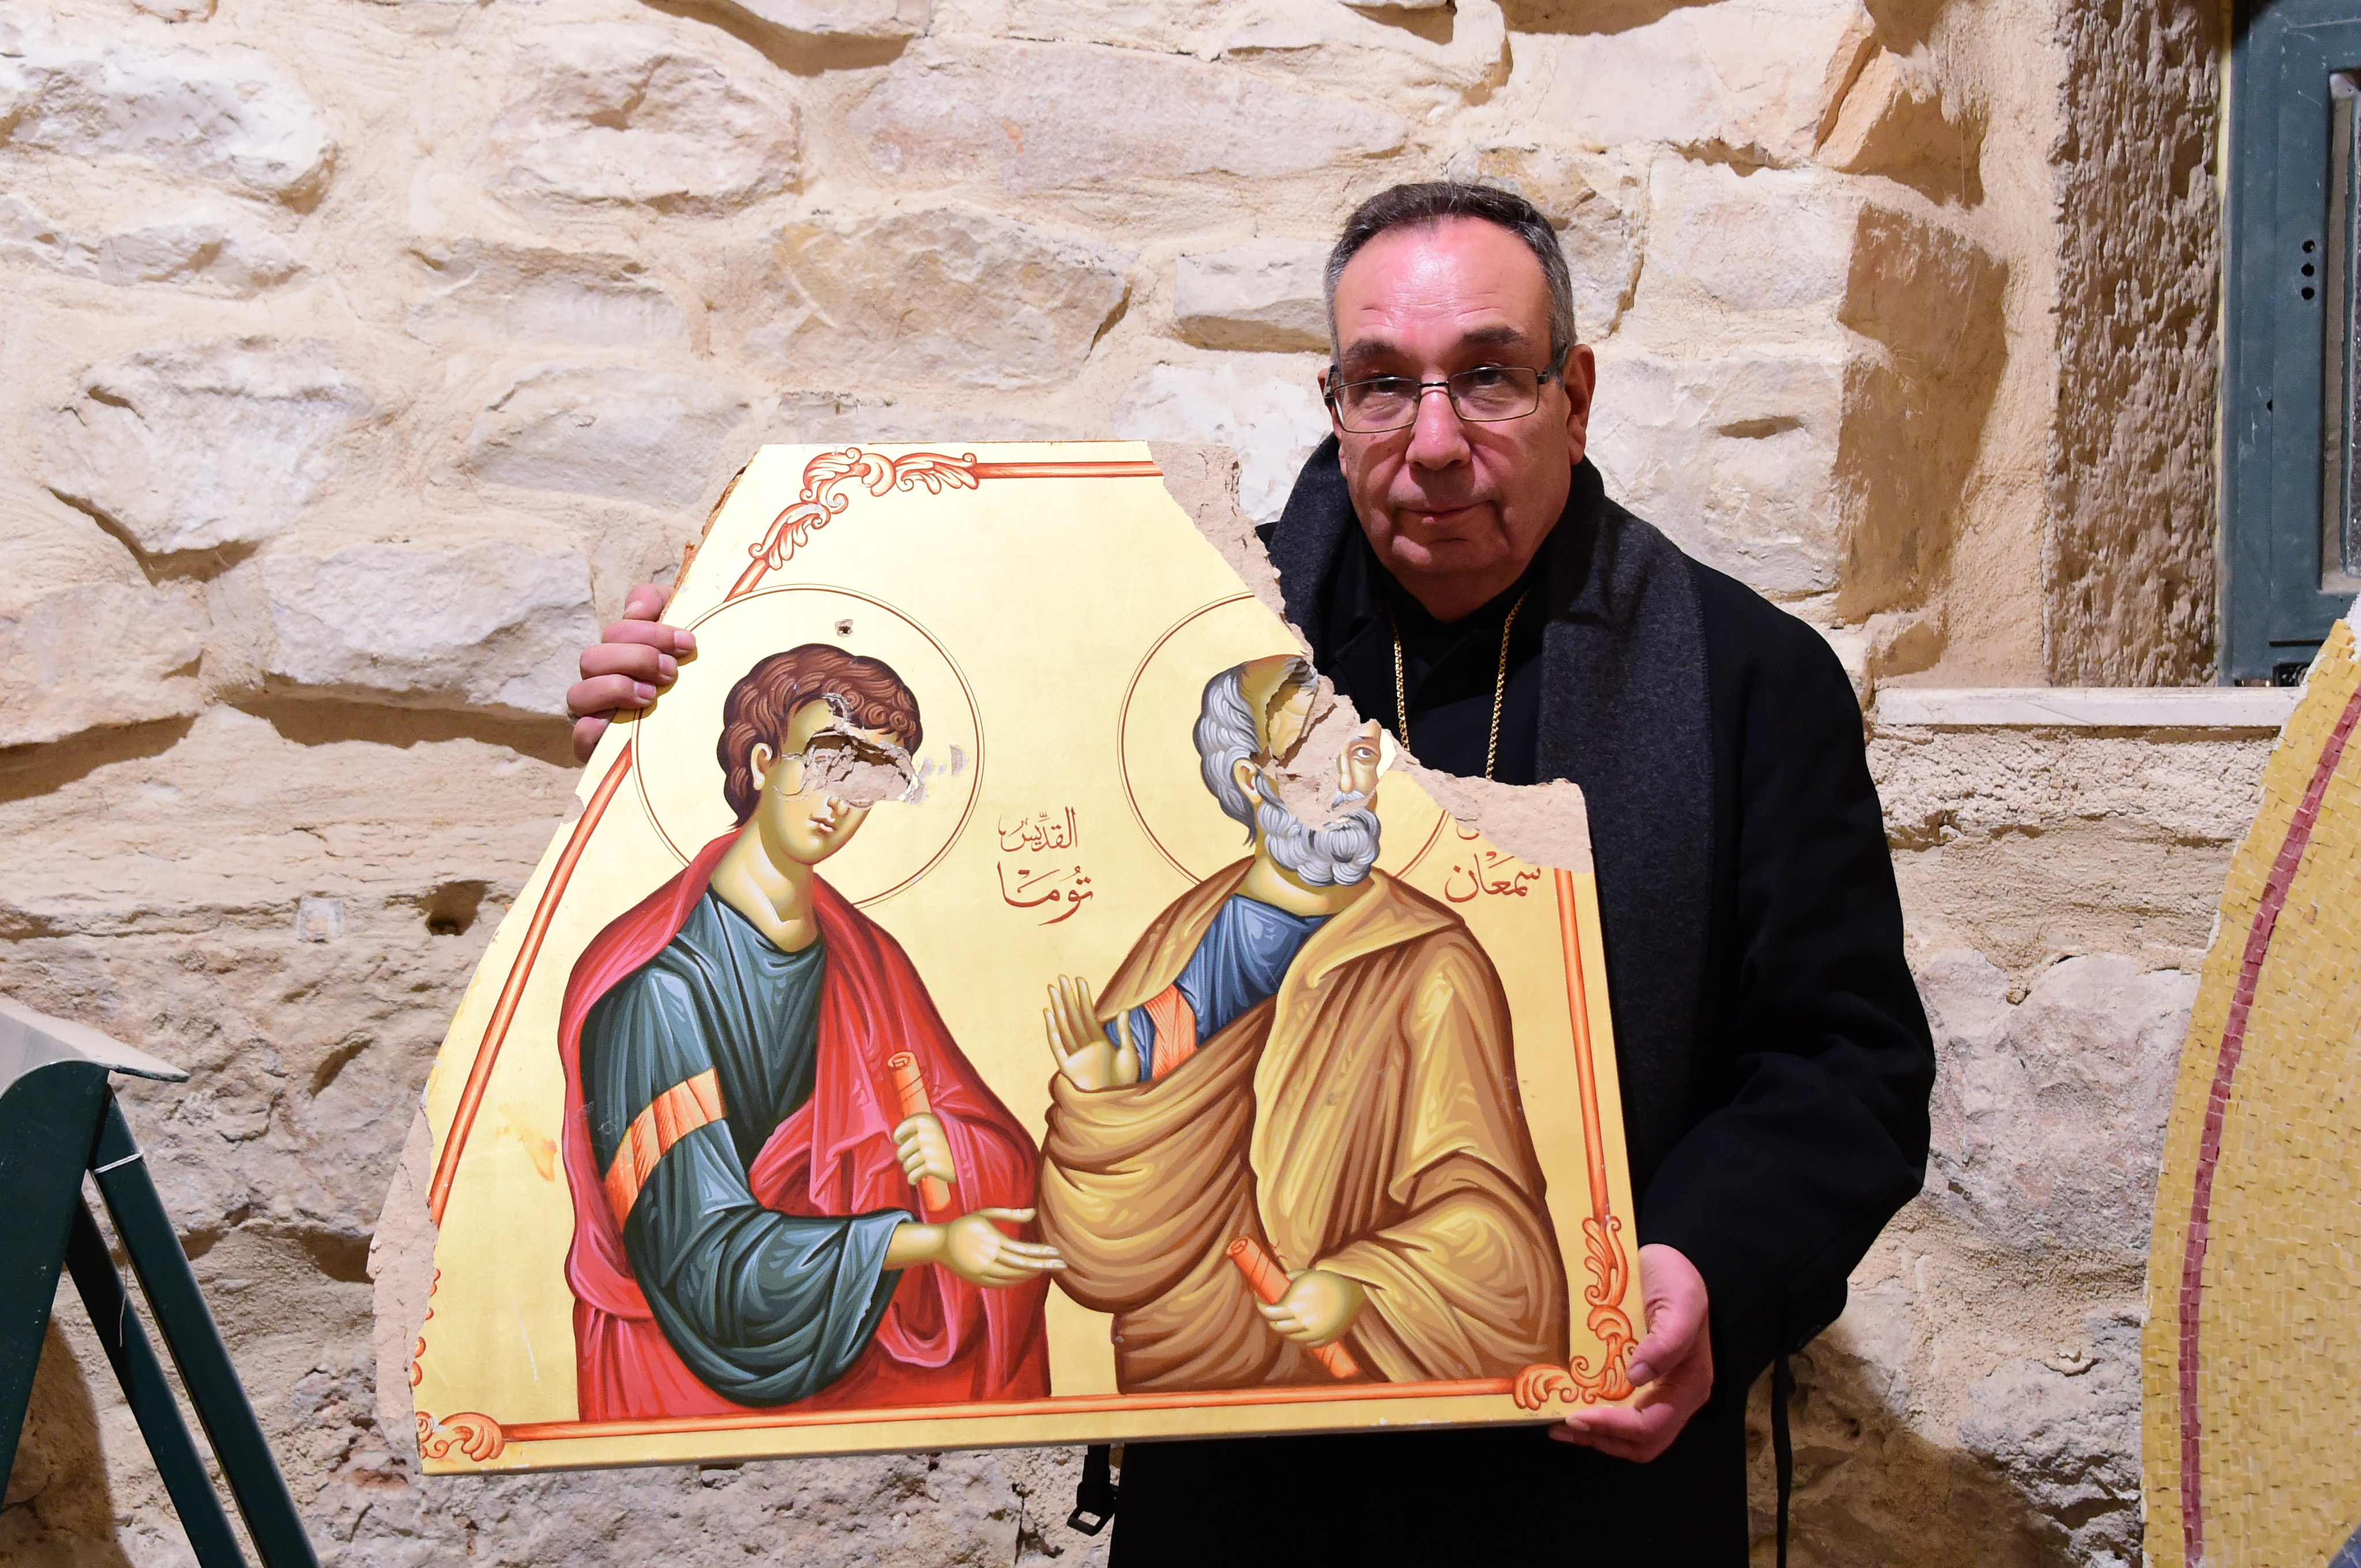 Melkite Archbishop Jean Abdou Arbach of Homs, Hama and Yabroud with an icon destroyed by Islamist militants among the rebels forces (© Aid to the Church in Need)